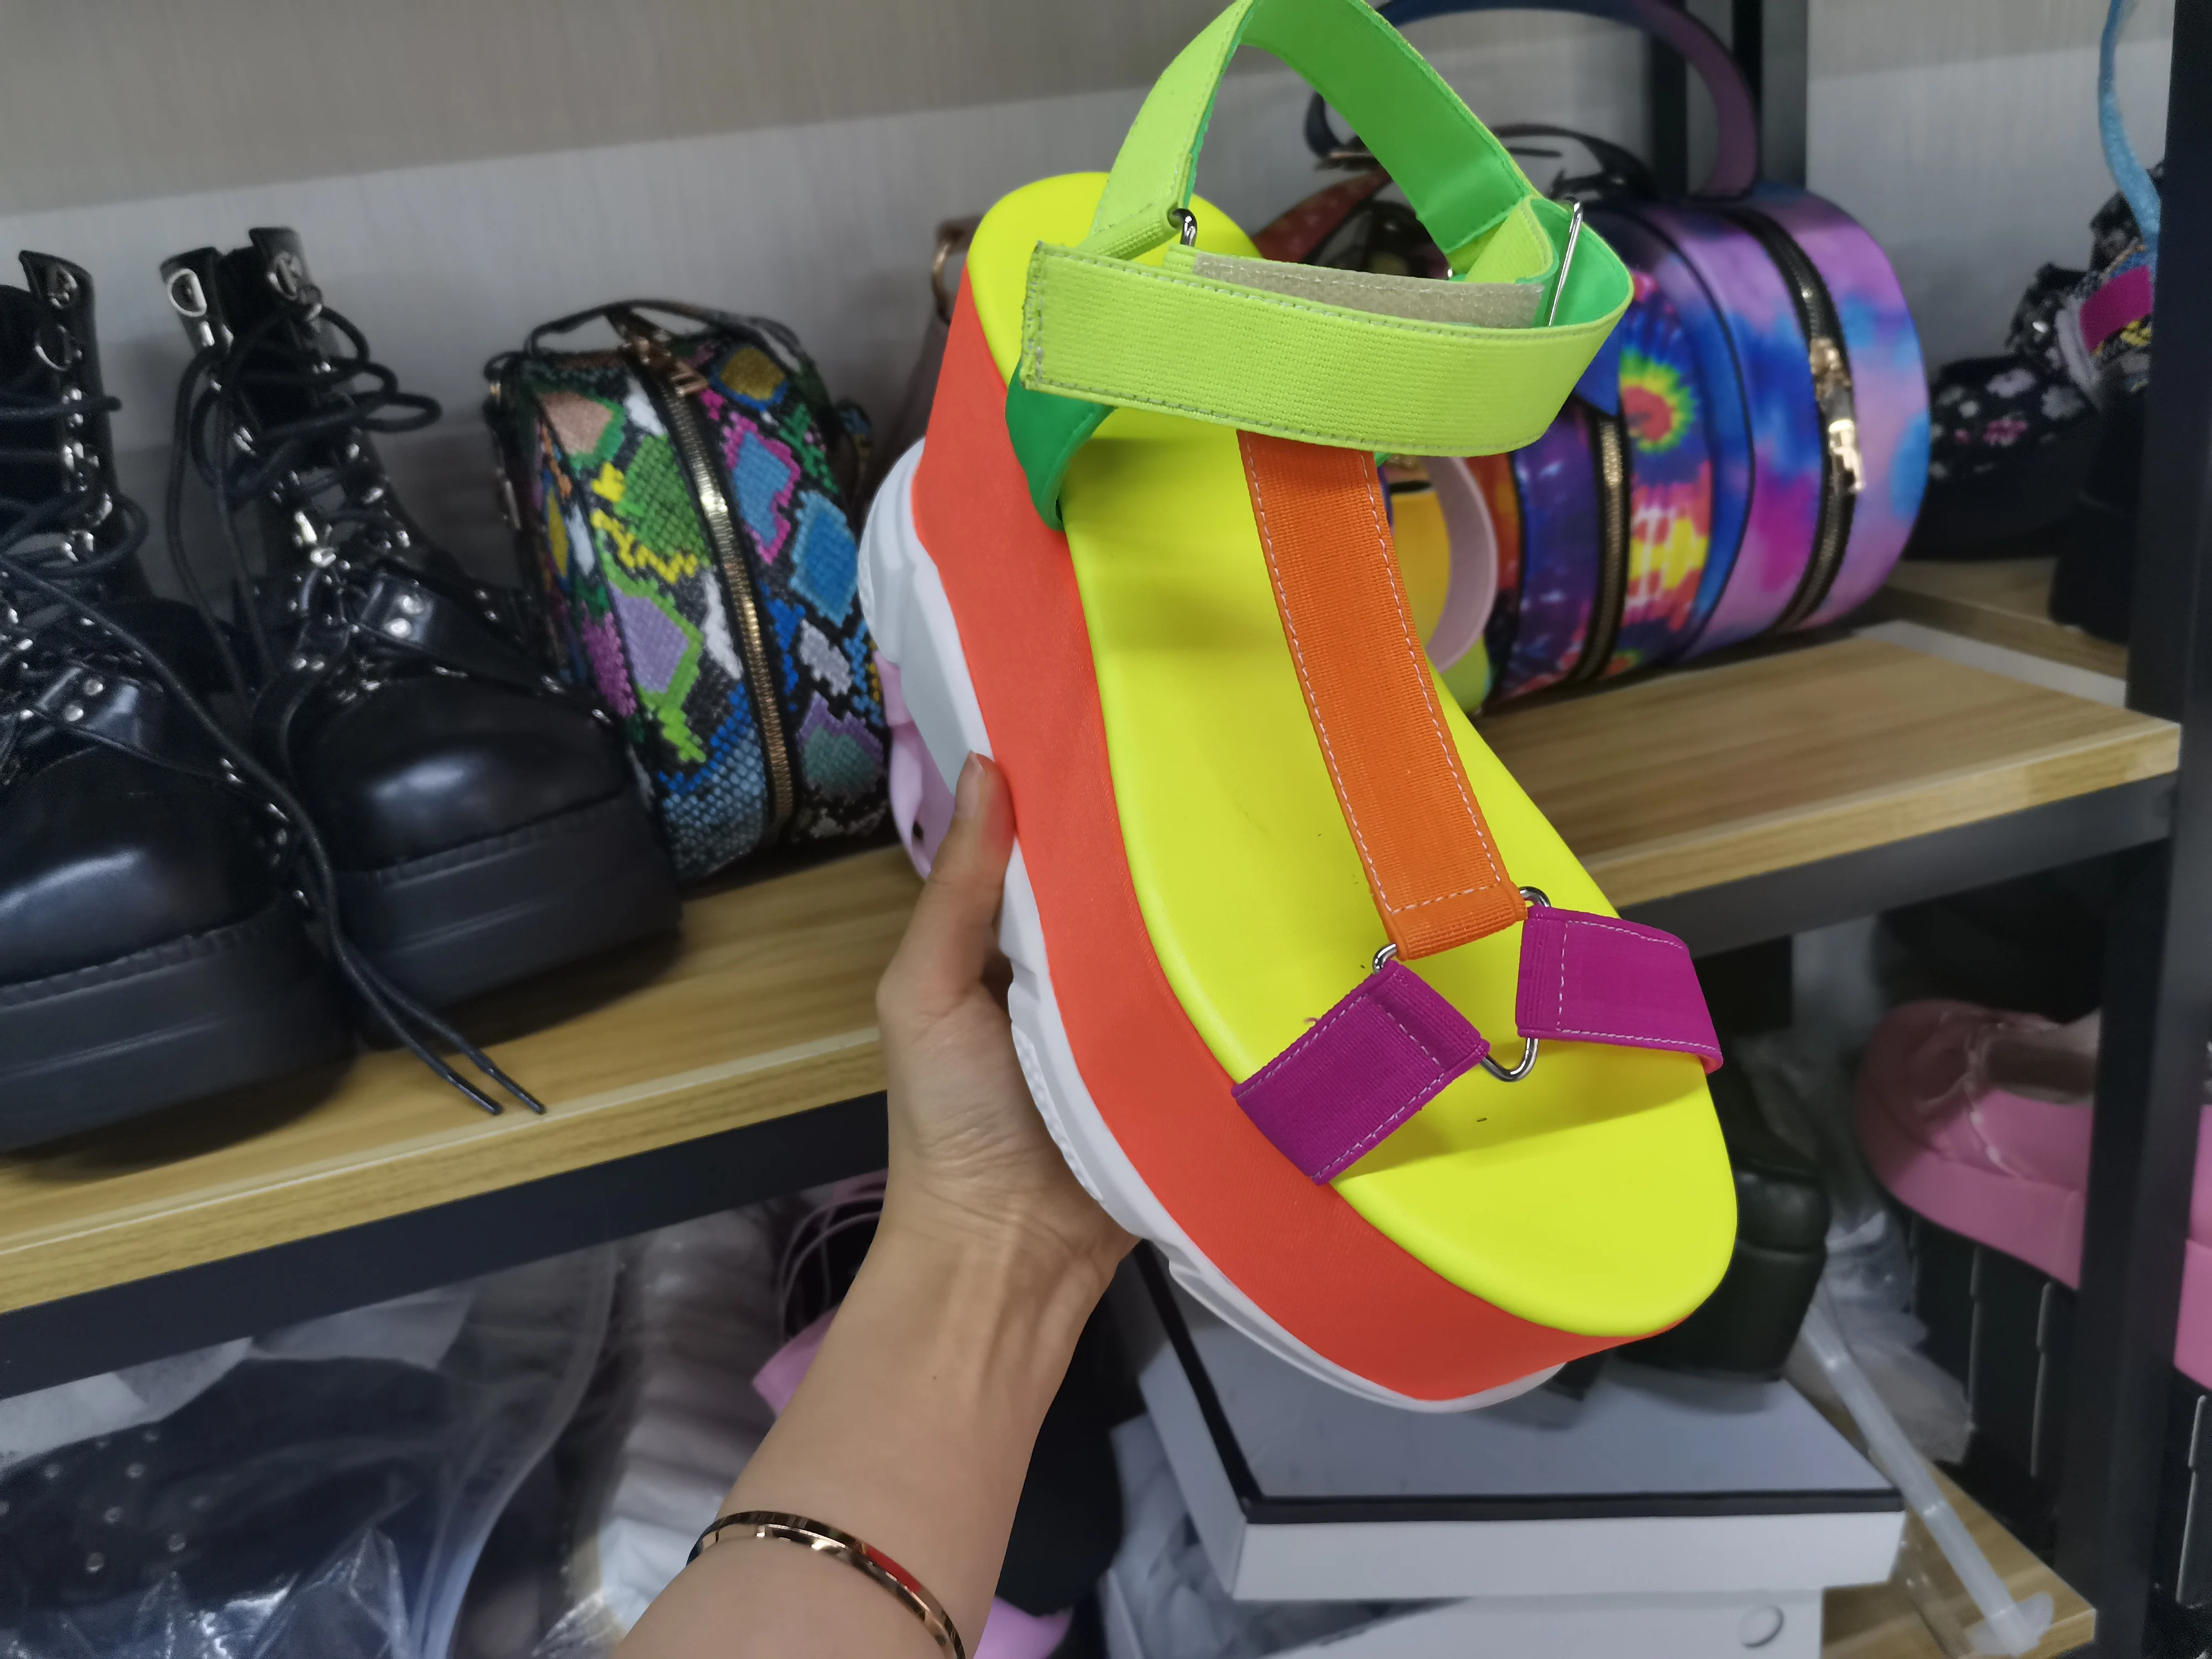 ins hot sale multicolor open toe platform wedges brand women sandals summer punk colorful design casual leisure shoes women free global shipping